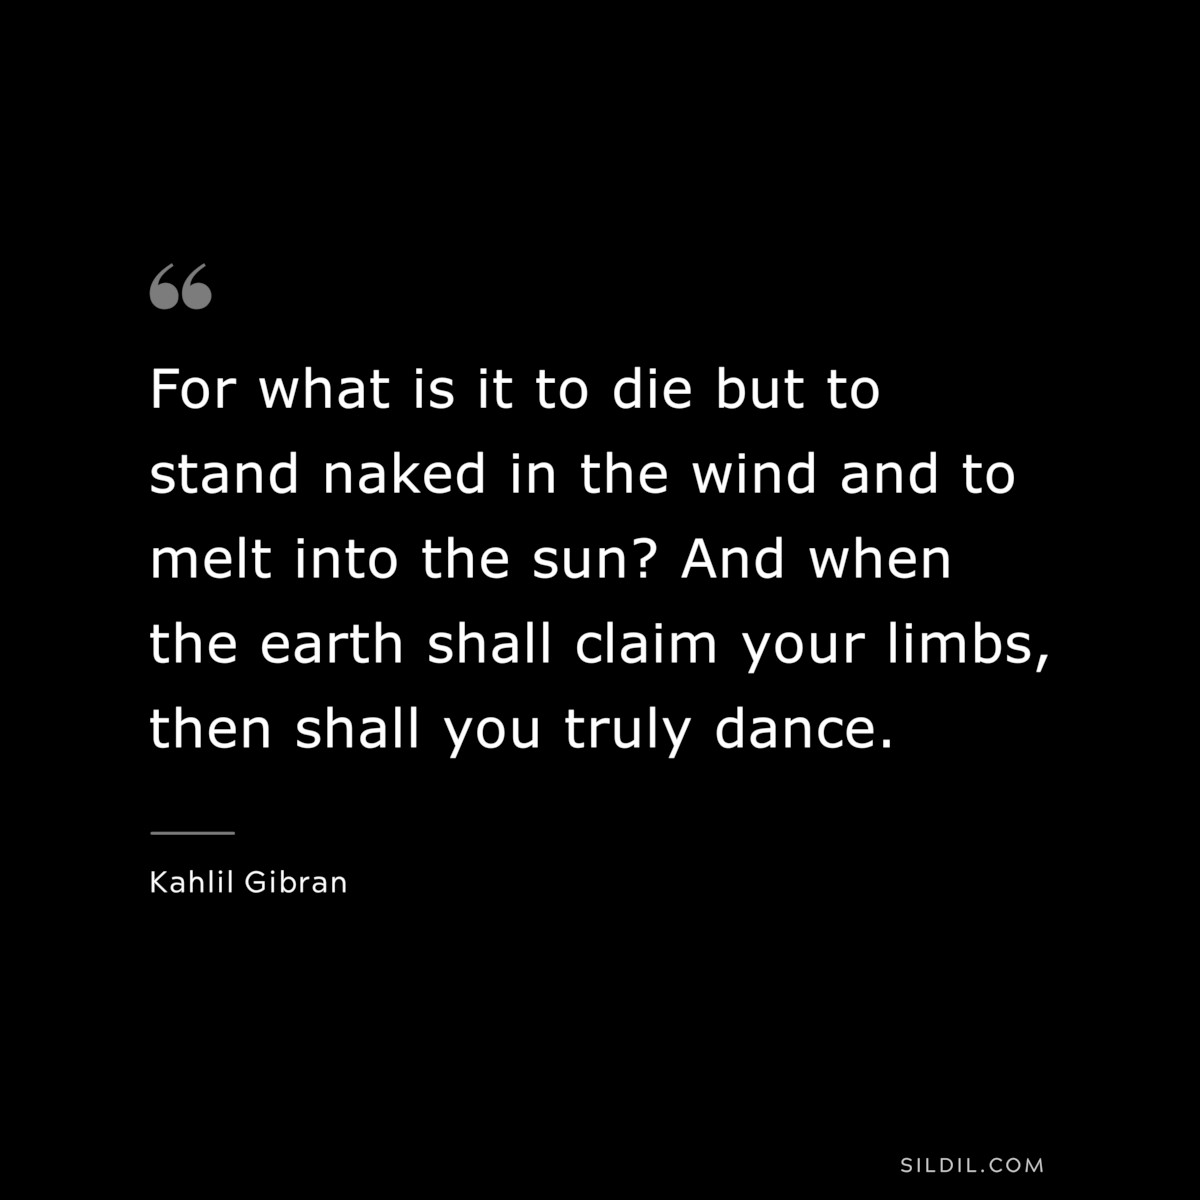 For what is it to die but to stand naked in the wind and to melt into the sun? And when the earth shall claim your limbs, then shall you truly dance. ― Kahlil Gibran